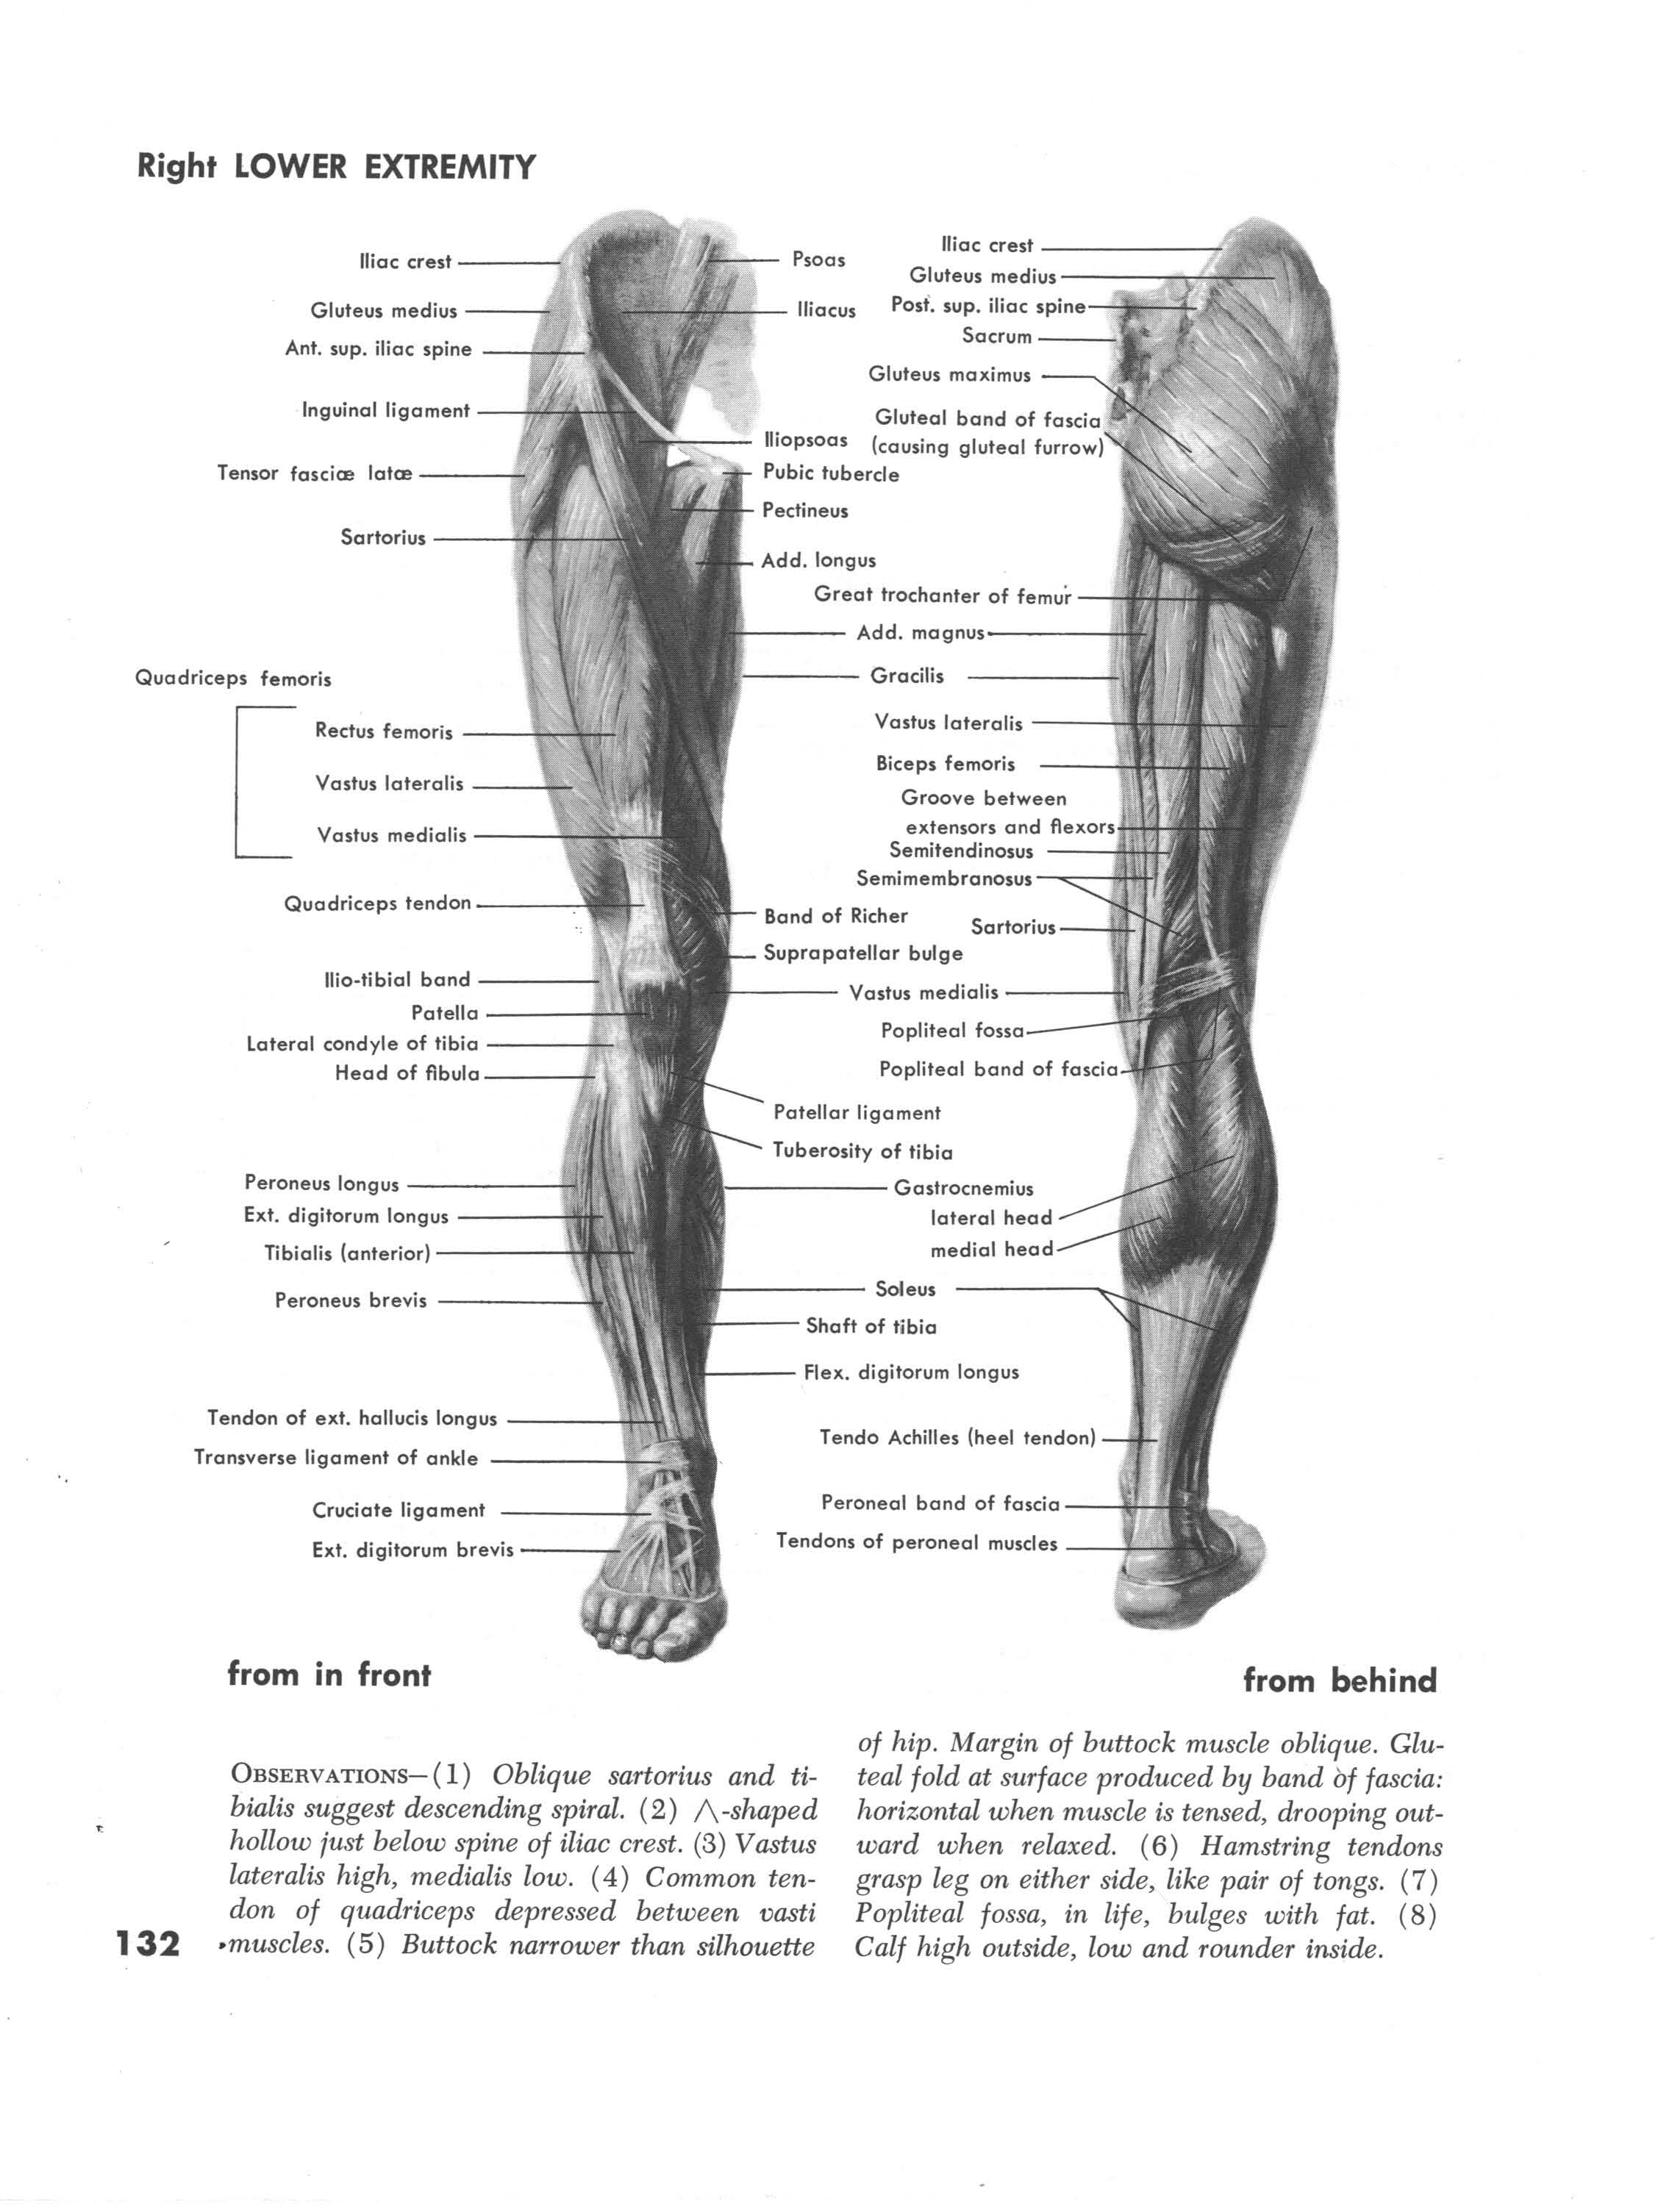 Muscles of the right lower extremity